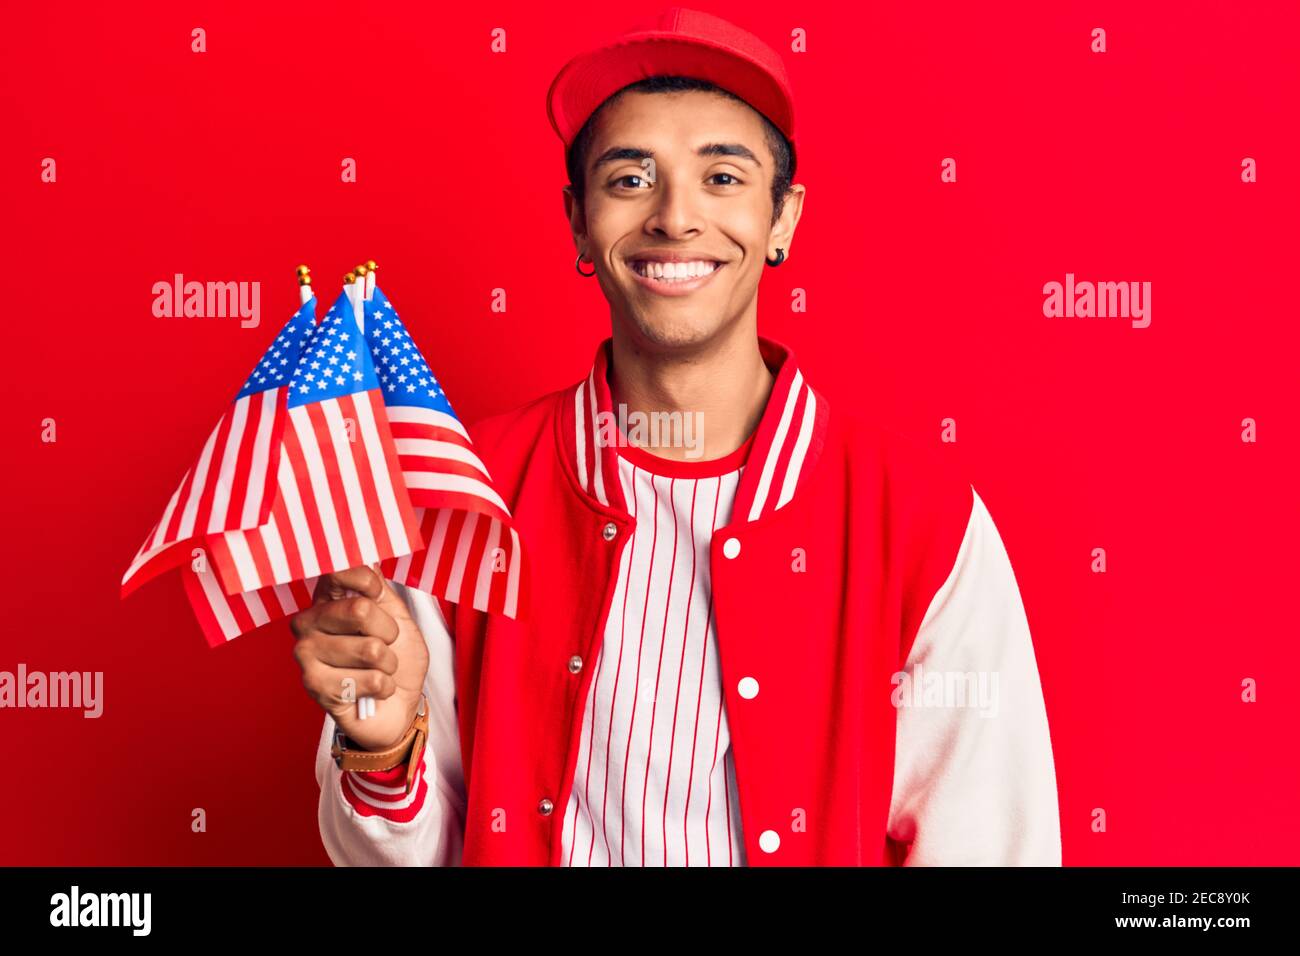 Young african amercian man wearing baseball uniform holding america flags looking positive and happy standing and smiling with a confident smile showi Stock Photo